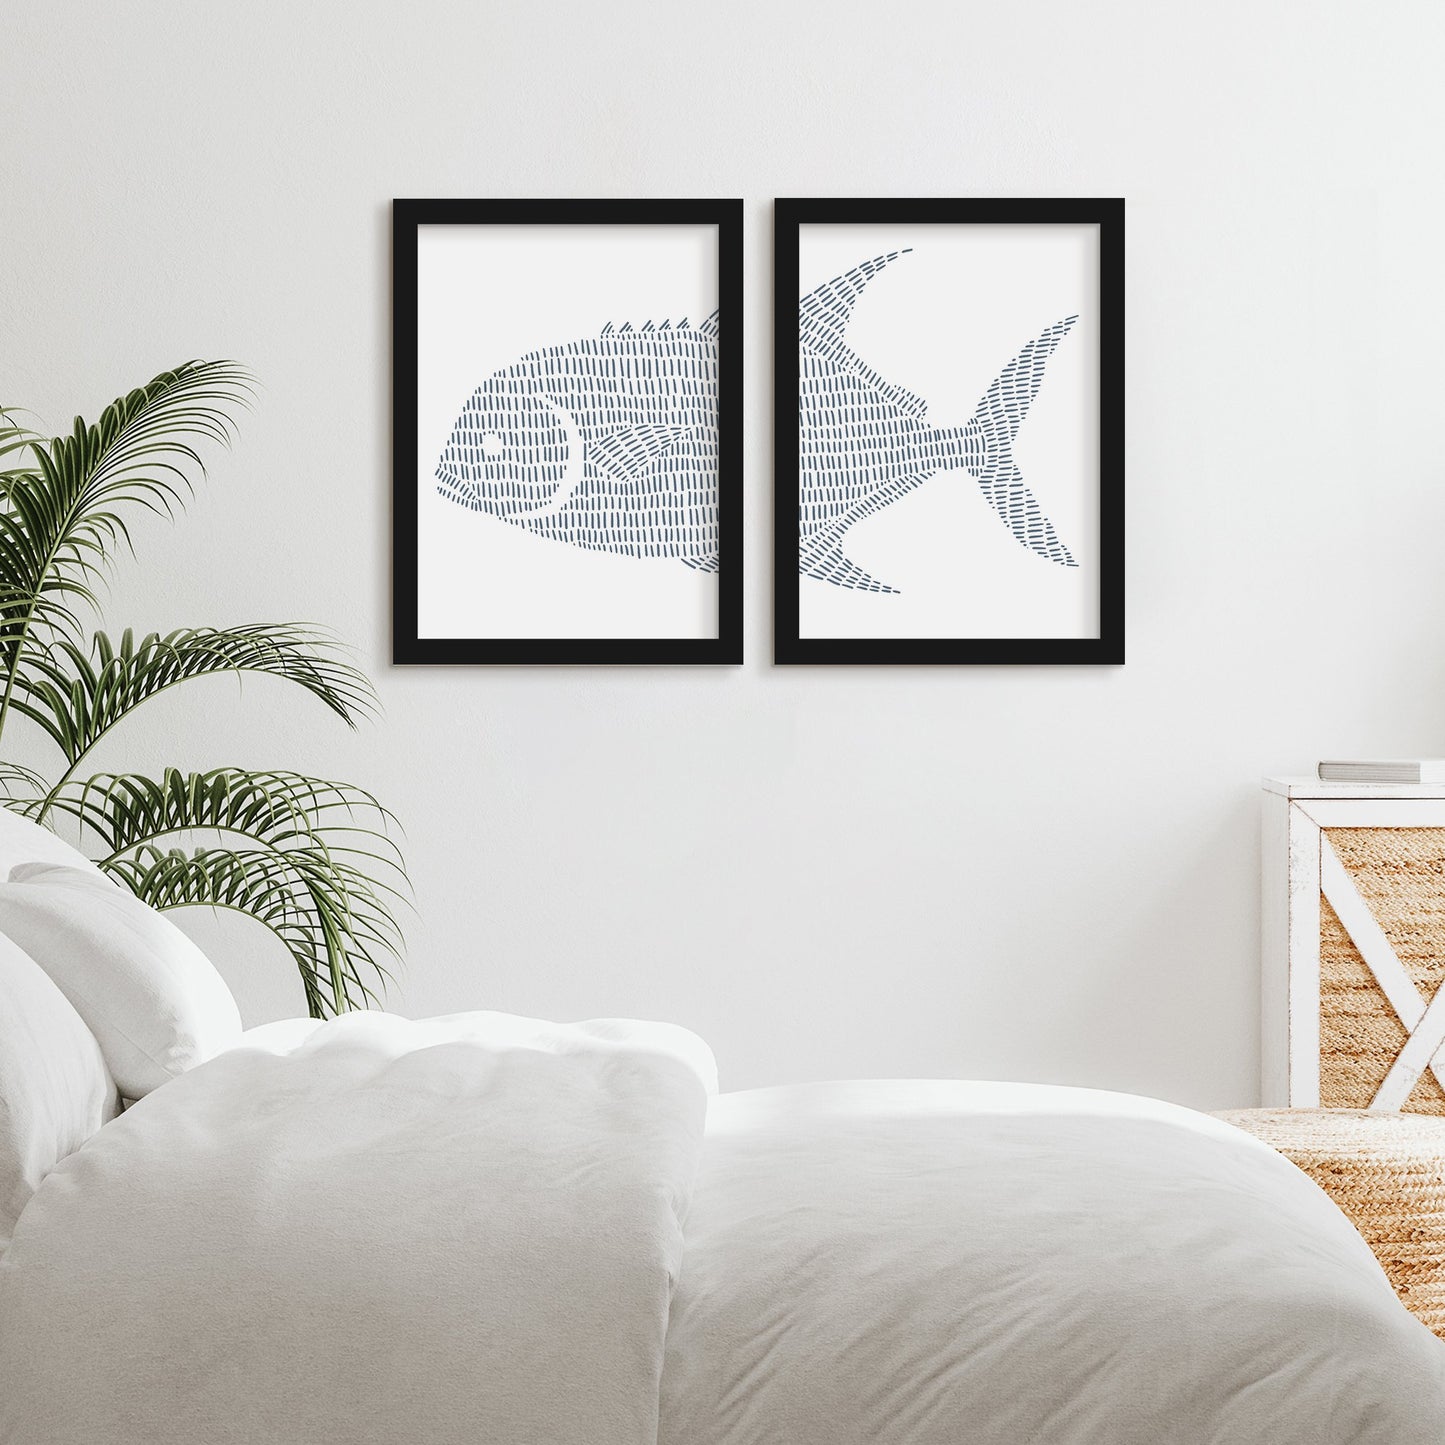 Fish Stripes by Jetty Home - 2 Piece Gallery Framed Print Art Set - Americanflat